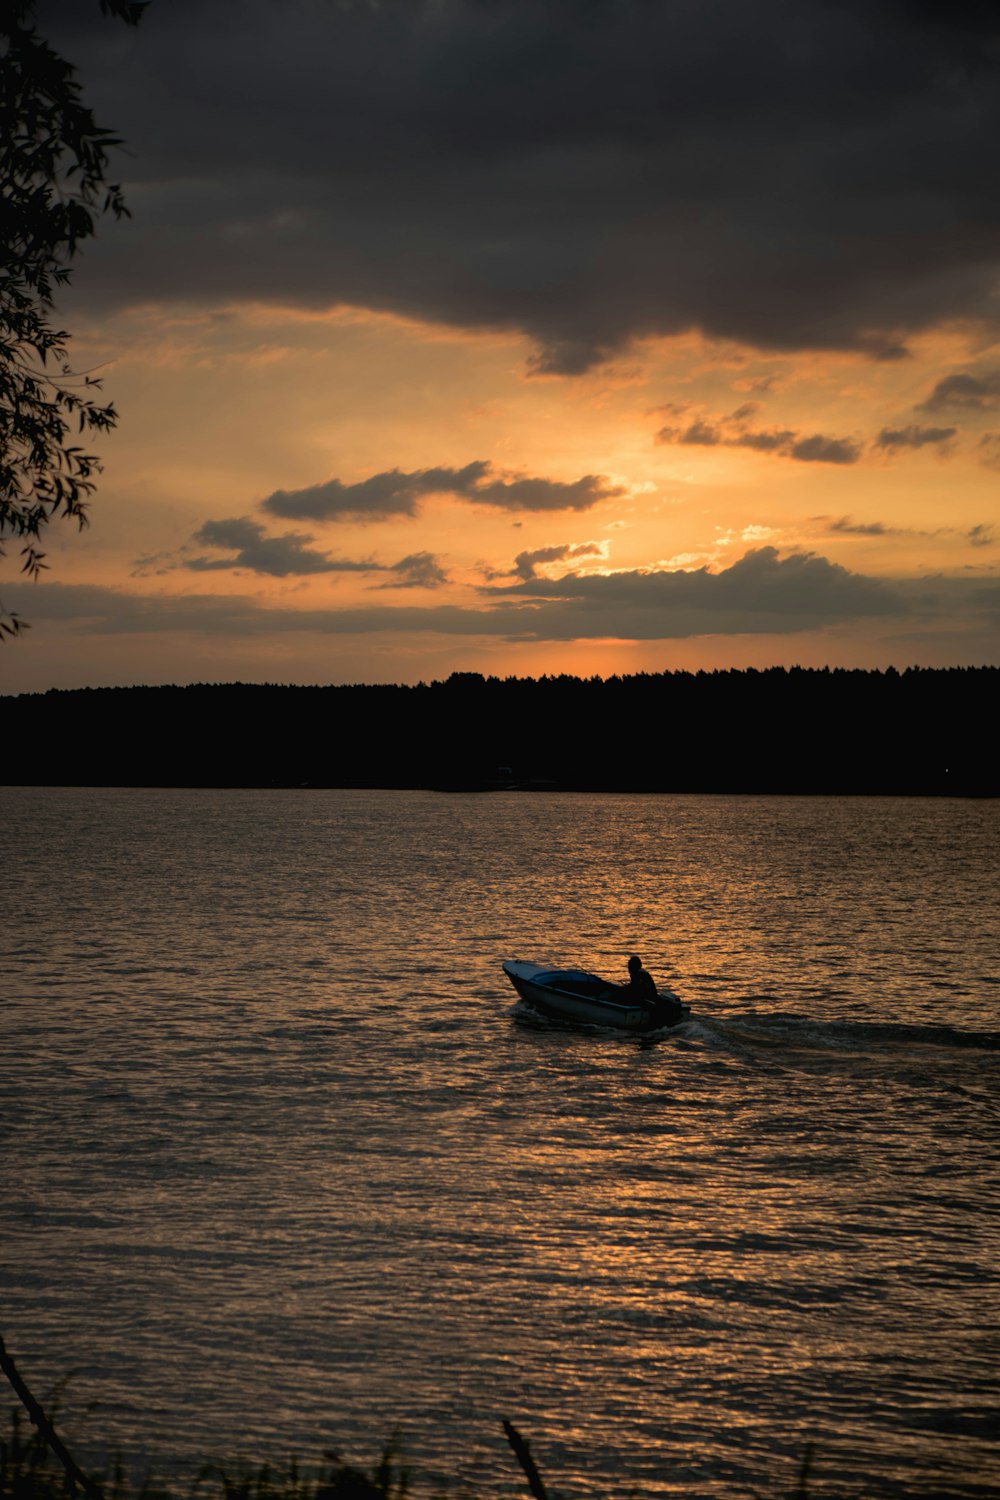 a person on a boat in the water at sunset